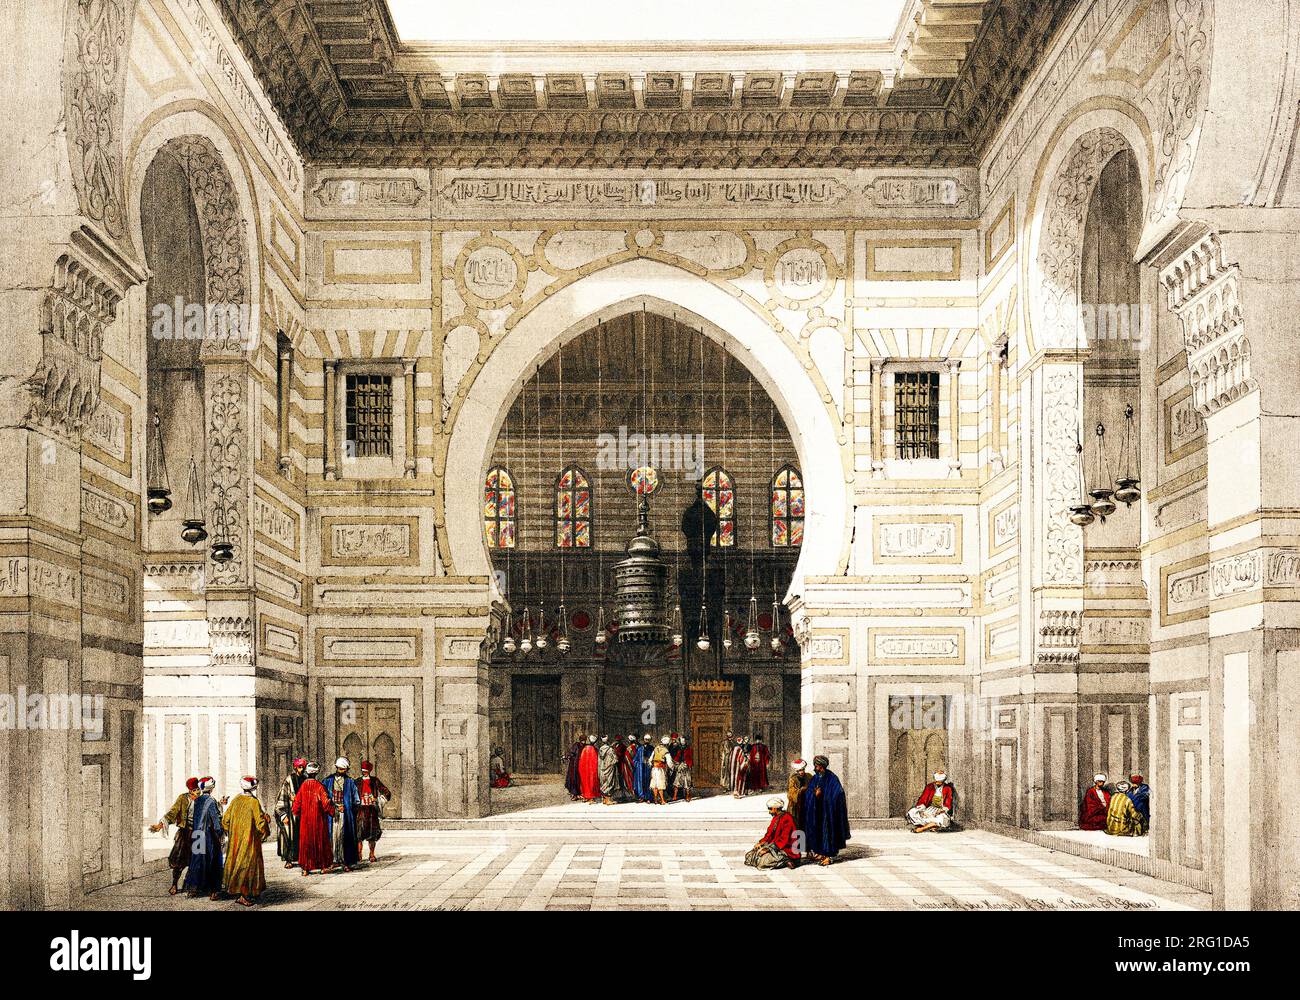 Interior of the mosque of the Sultan the Ghoree illustration by David Roberts . Original from The New York Public Library. Stock Photo